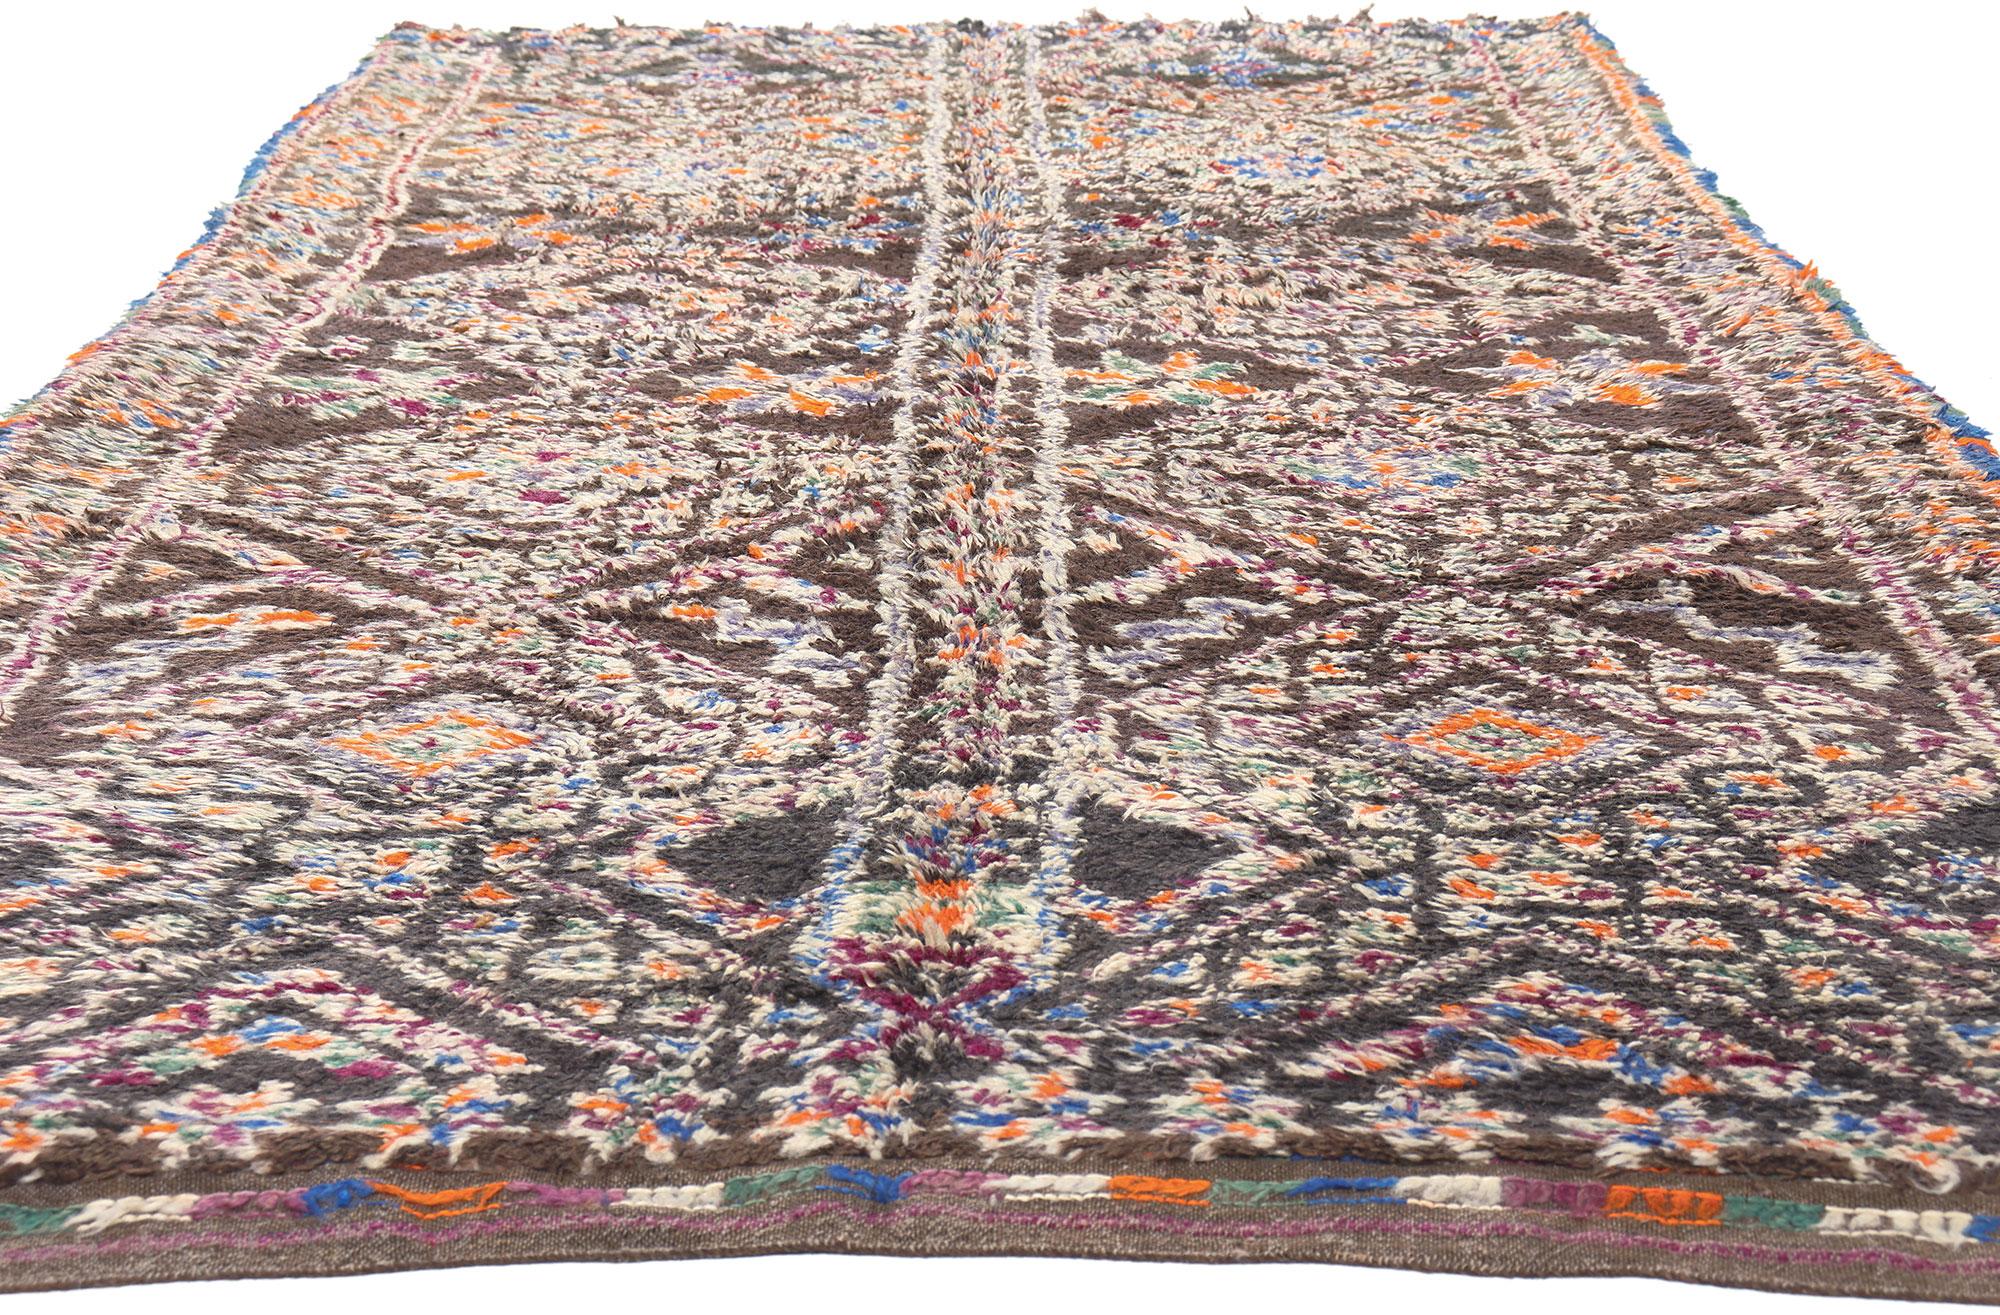 Hand-Knotted Vintage Brown Beni M'Guild Moroccan Rug, Midcentury Modern Meets Tribal Boho For Sale